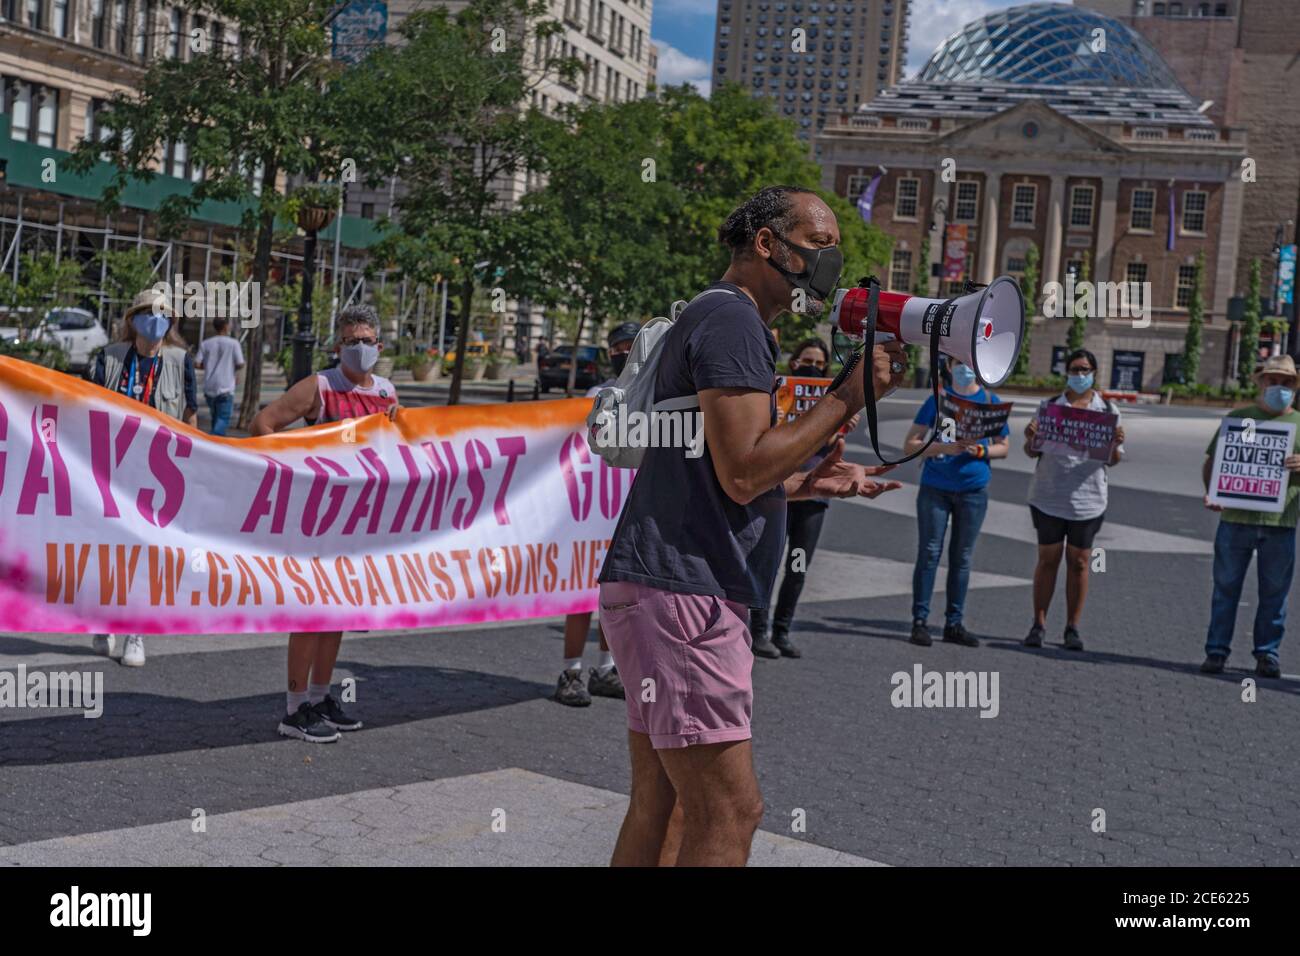 NEW YORK, NEW YORK - AUGUST 30: Activist speaks during a Gay Against Guns protest on August 30, 2020 in New York City. Stock Photo